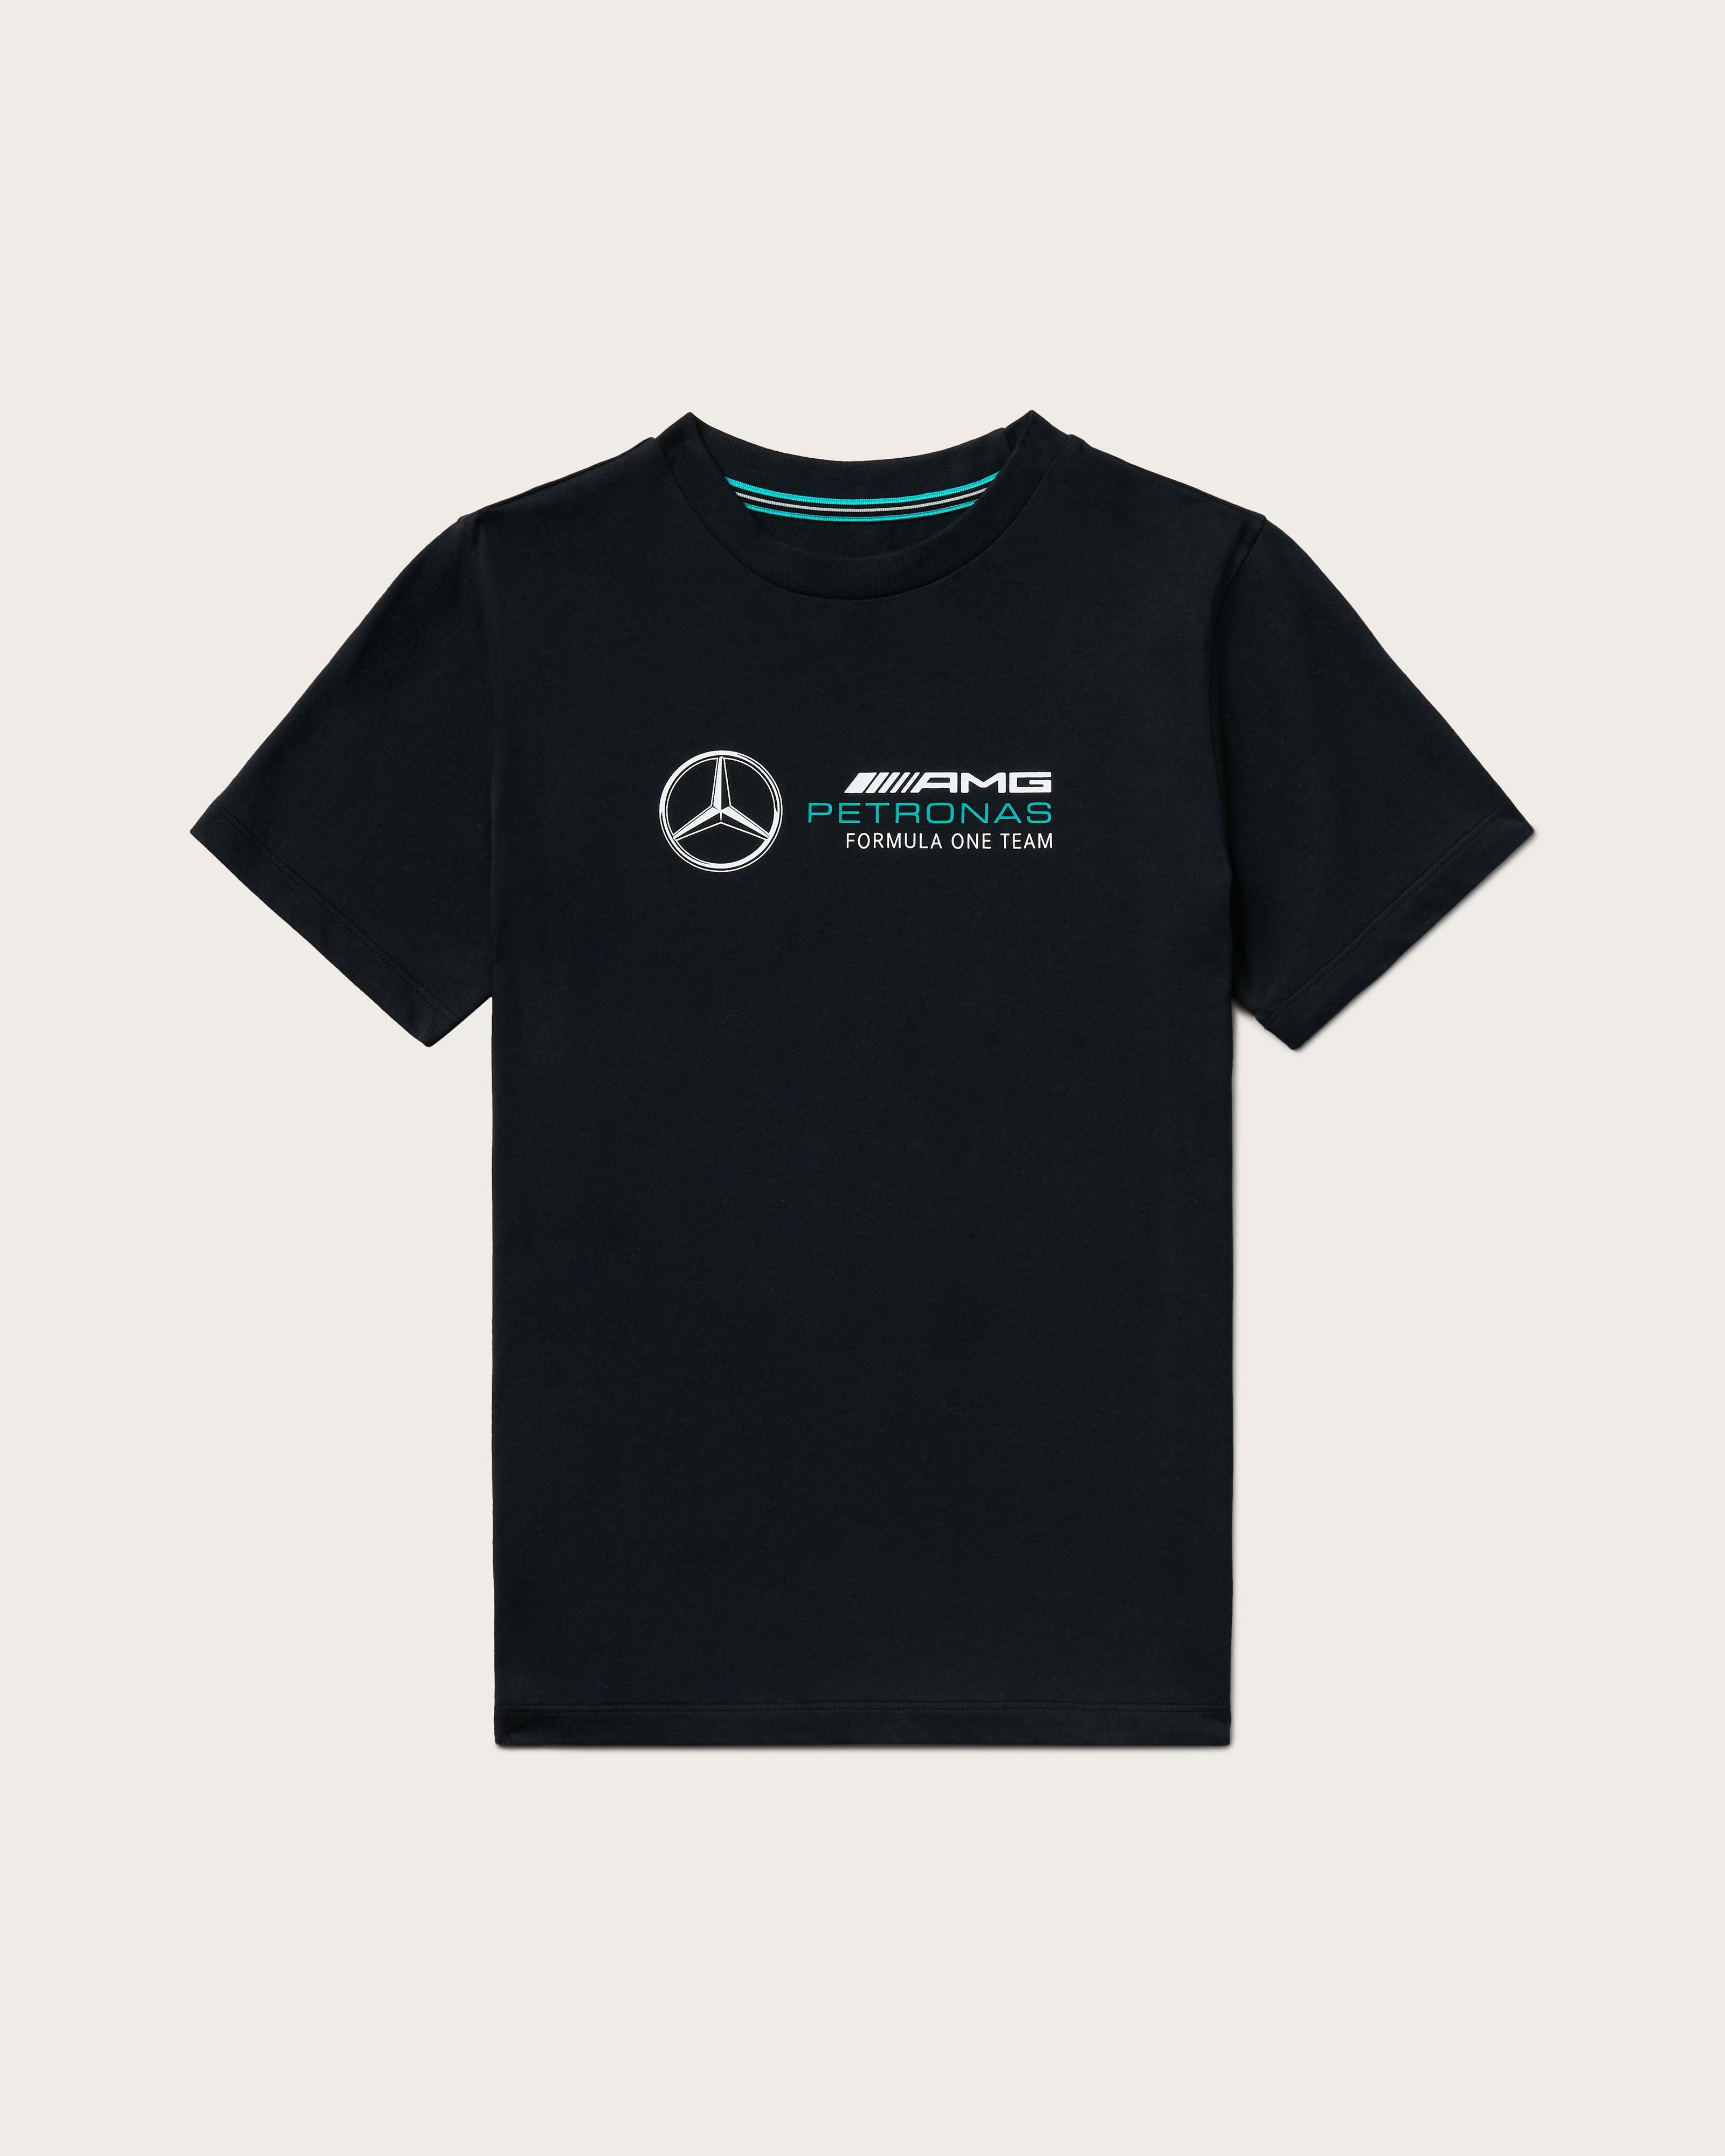 Mercedes F1 Kidswear | Official Mercedes-AMG F1 Store